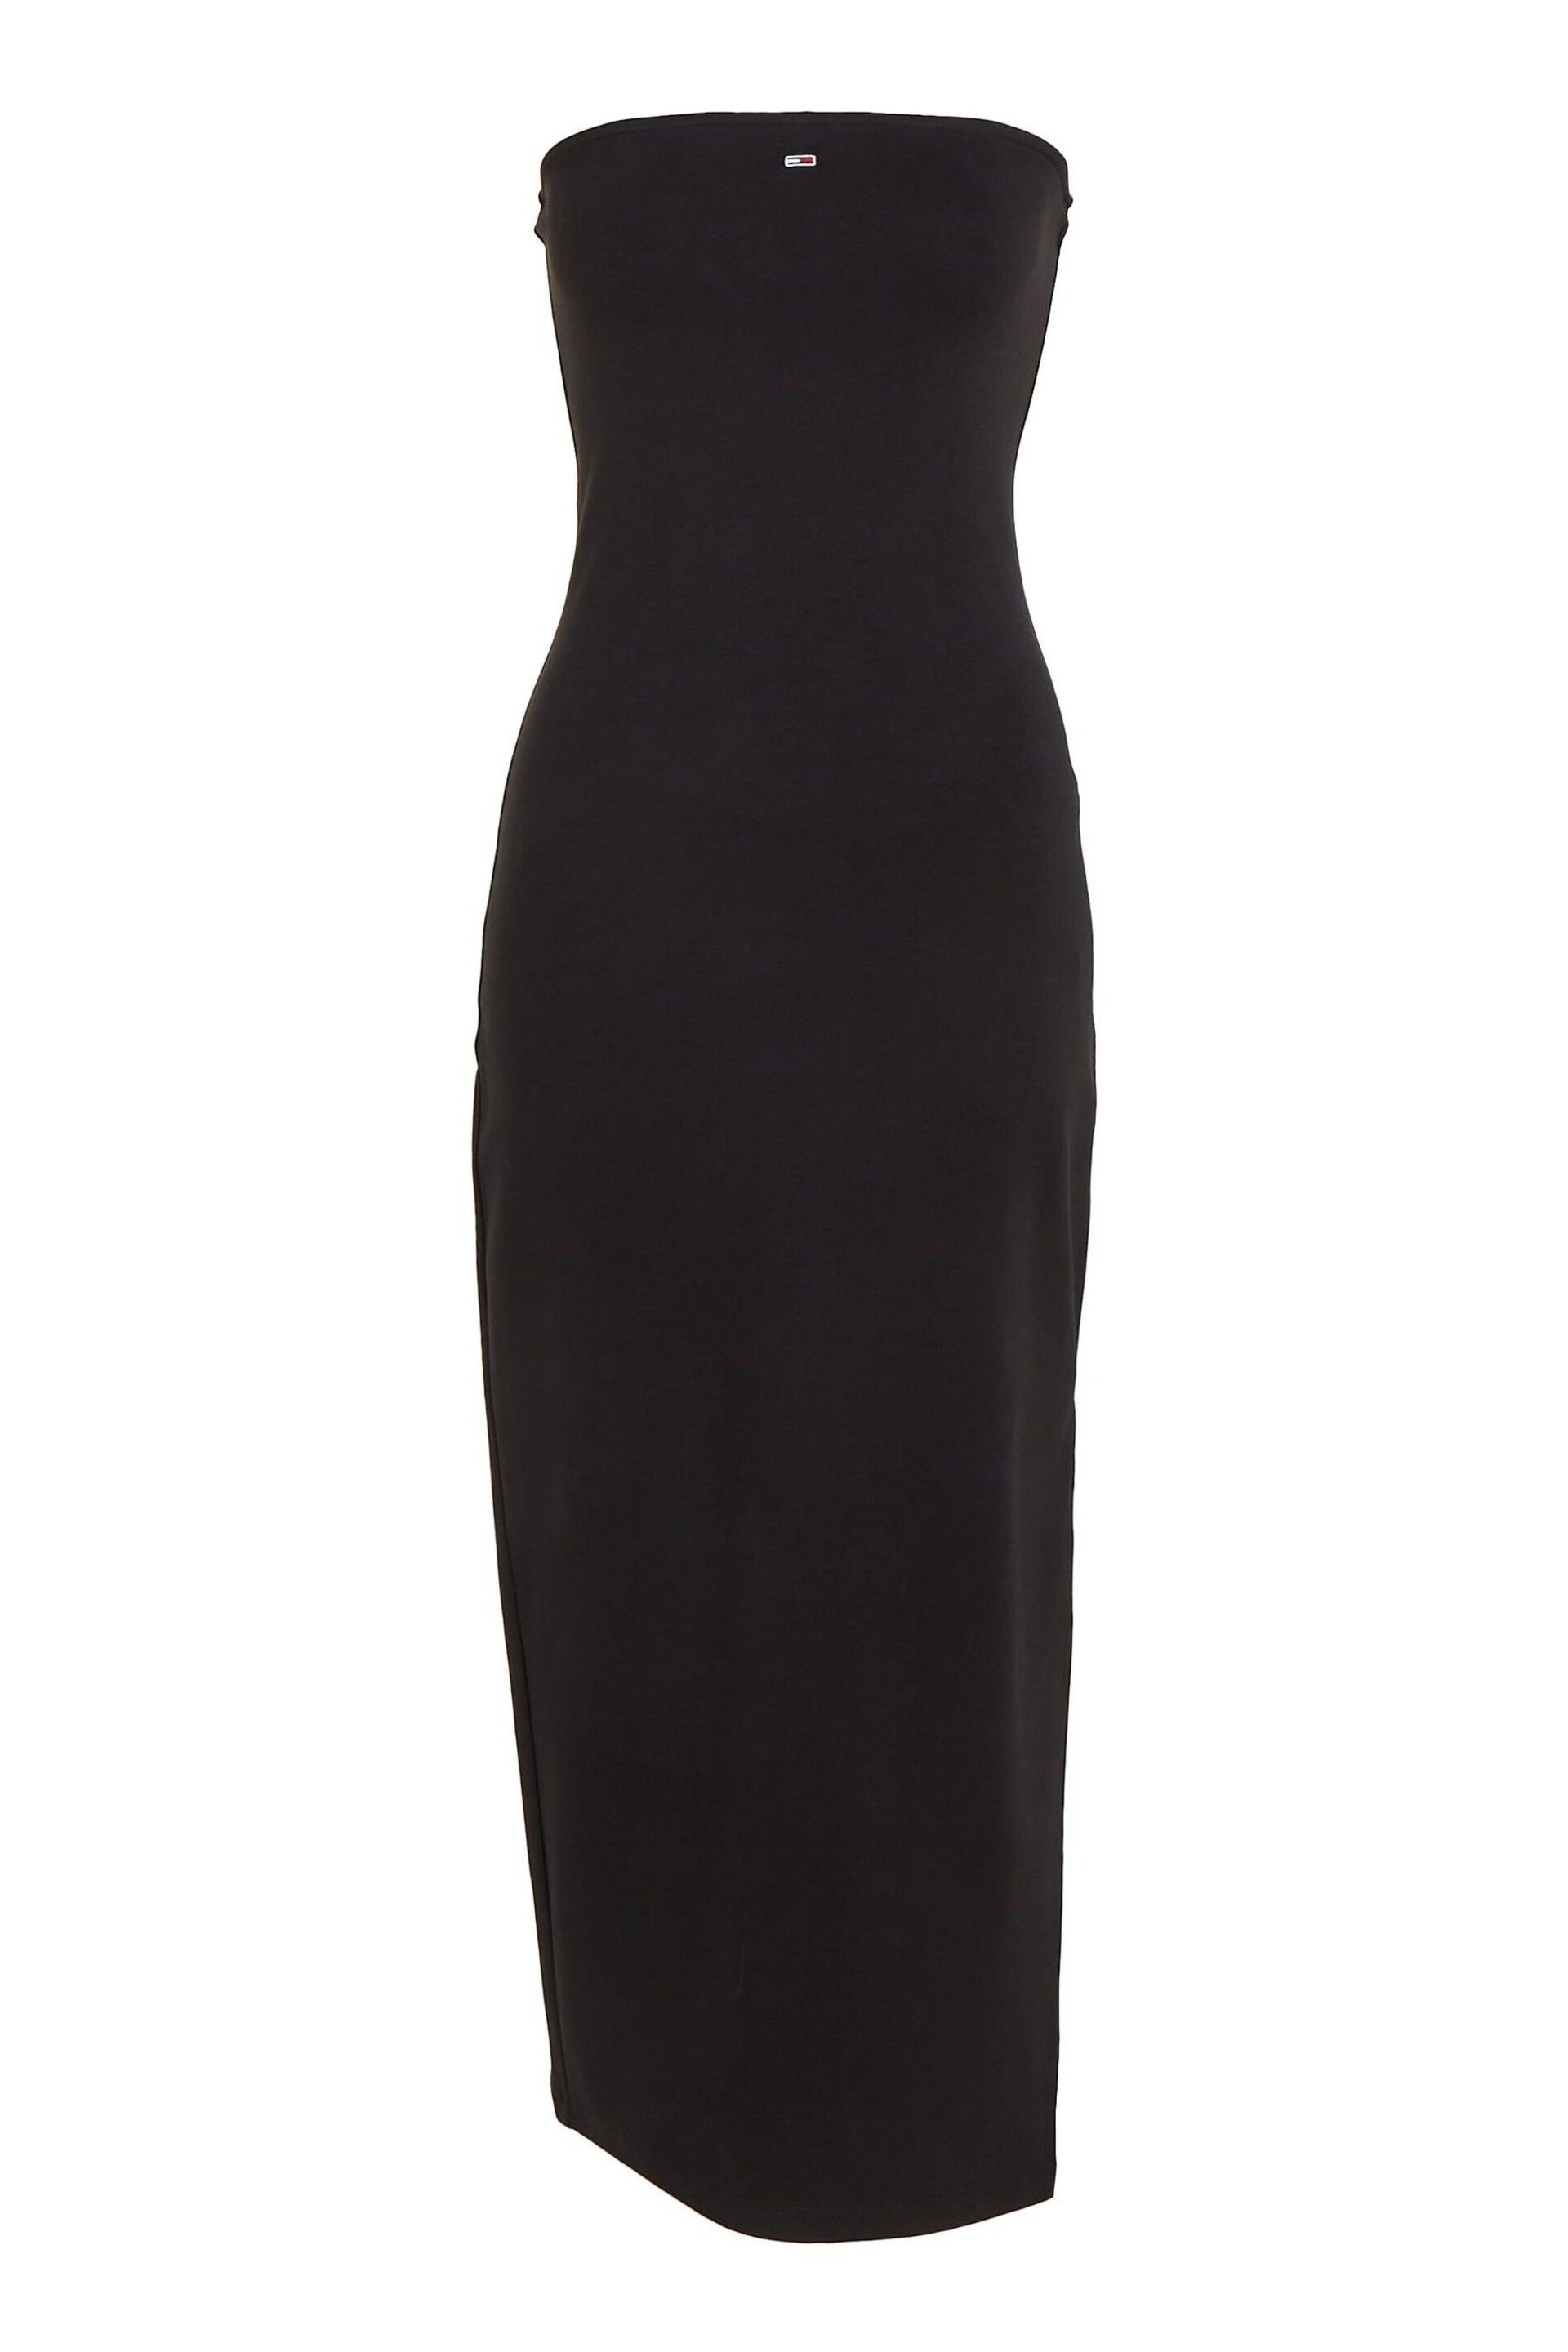 Tommy Jeans Midi Bodycon Tube Black Dress - Image 4 of 6